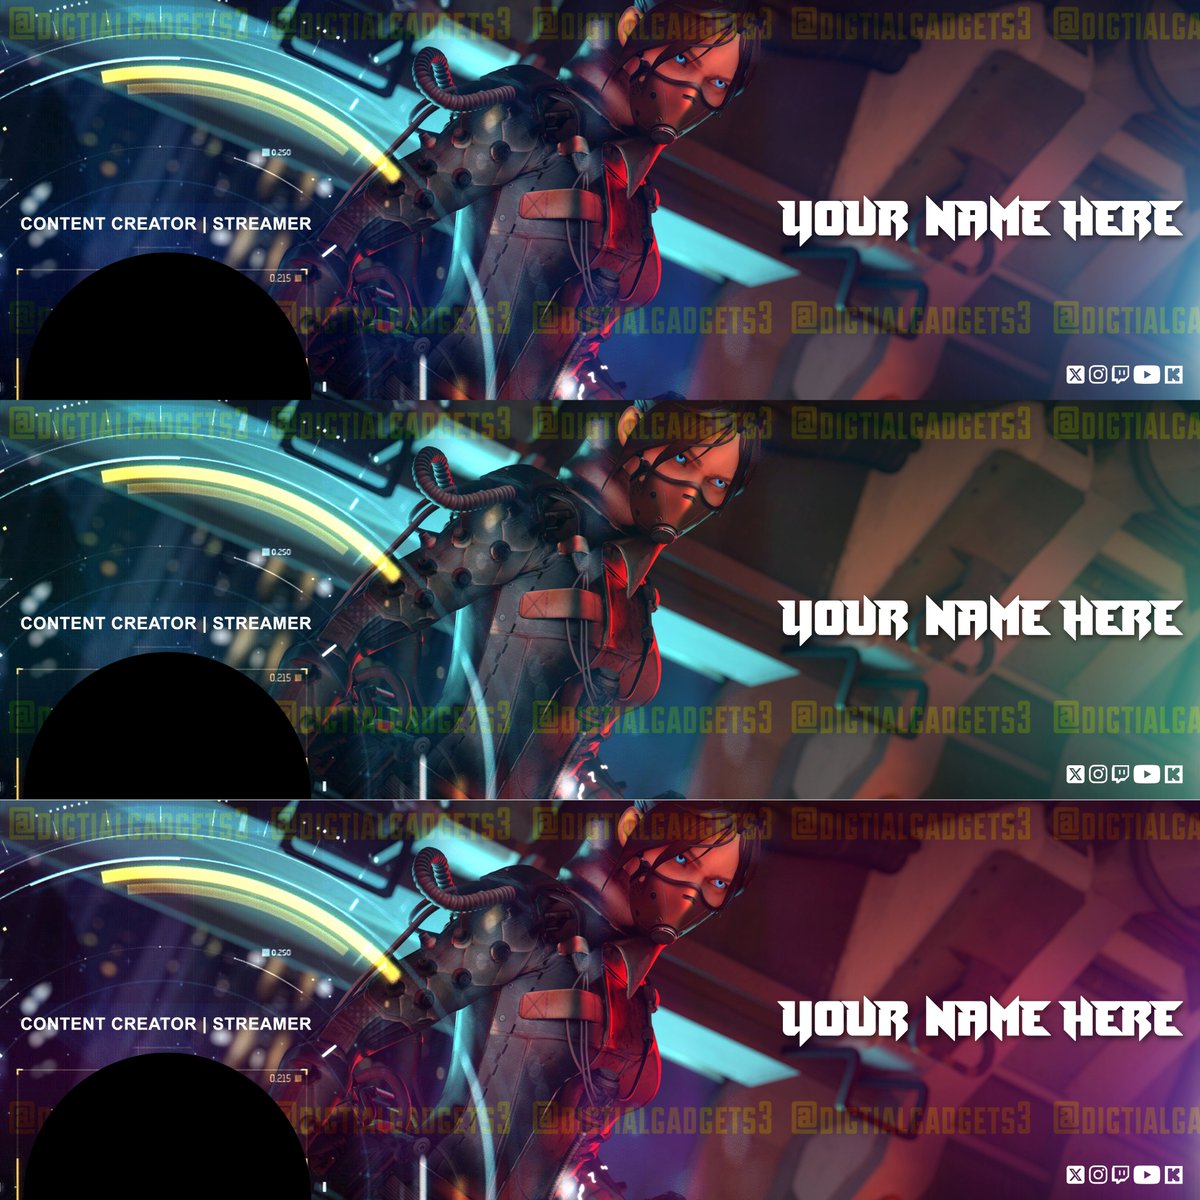 Excited to share the latest addition to my #etsy shop: 

Customizable Wraith Airship Assassin Banner for X(Twitter), Twitch, Youtube, Kick, etc.      

etsy.me/3UucvpX

#bedroom #videogame #streaming #banner #custombanner #twitchbanner #xbanner #youtubebanner #kickbanner